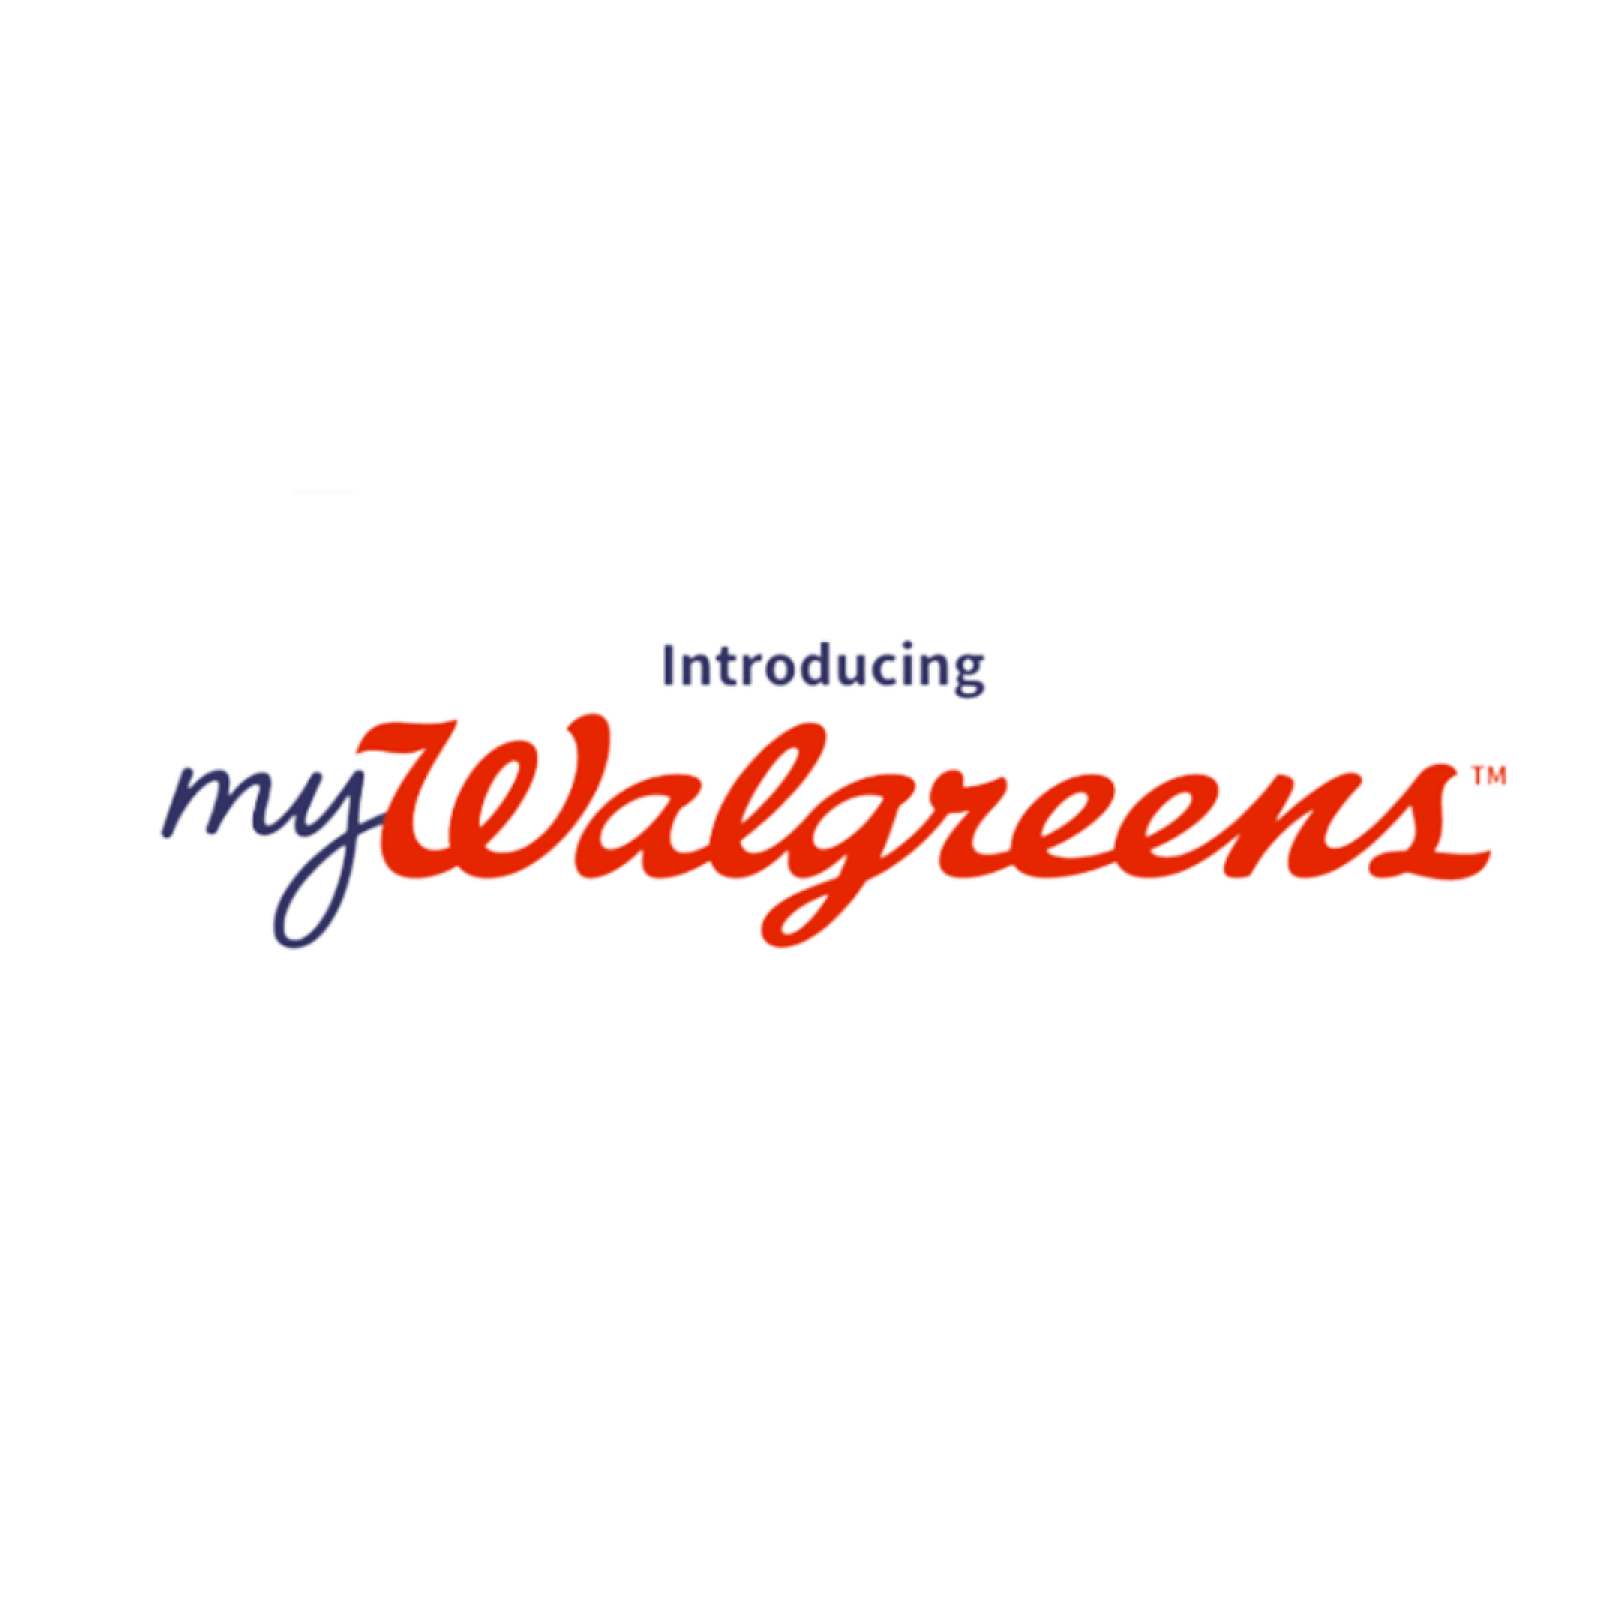 In November, Walgreens announced the launch of myWalgreens